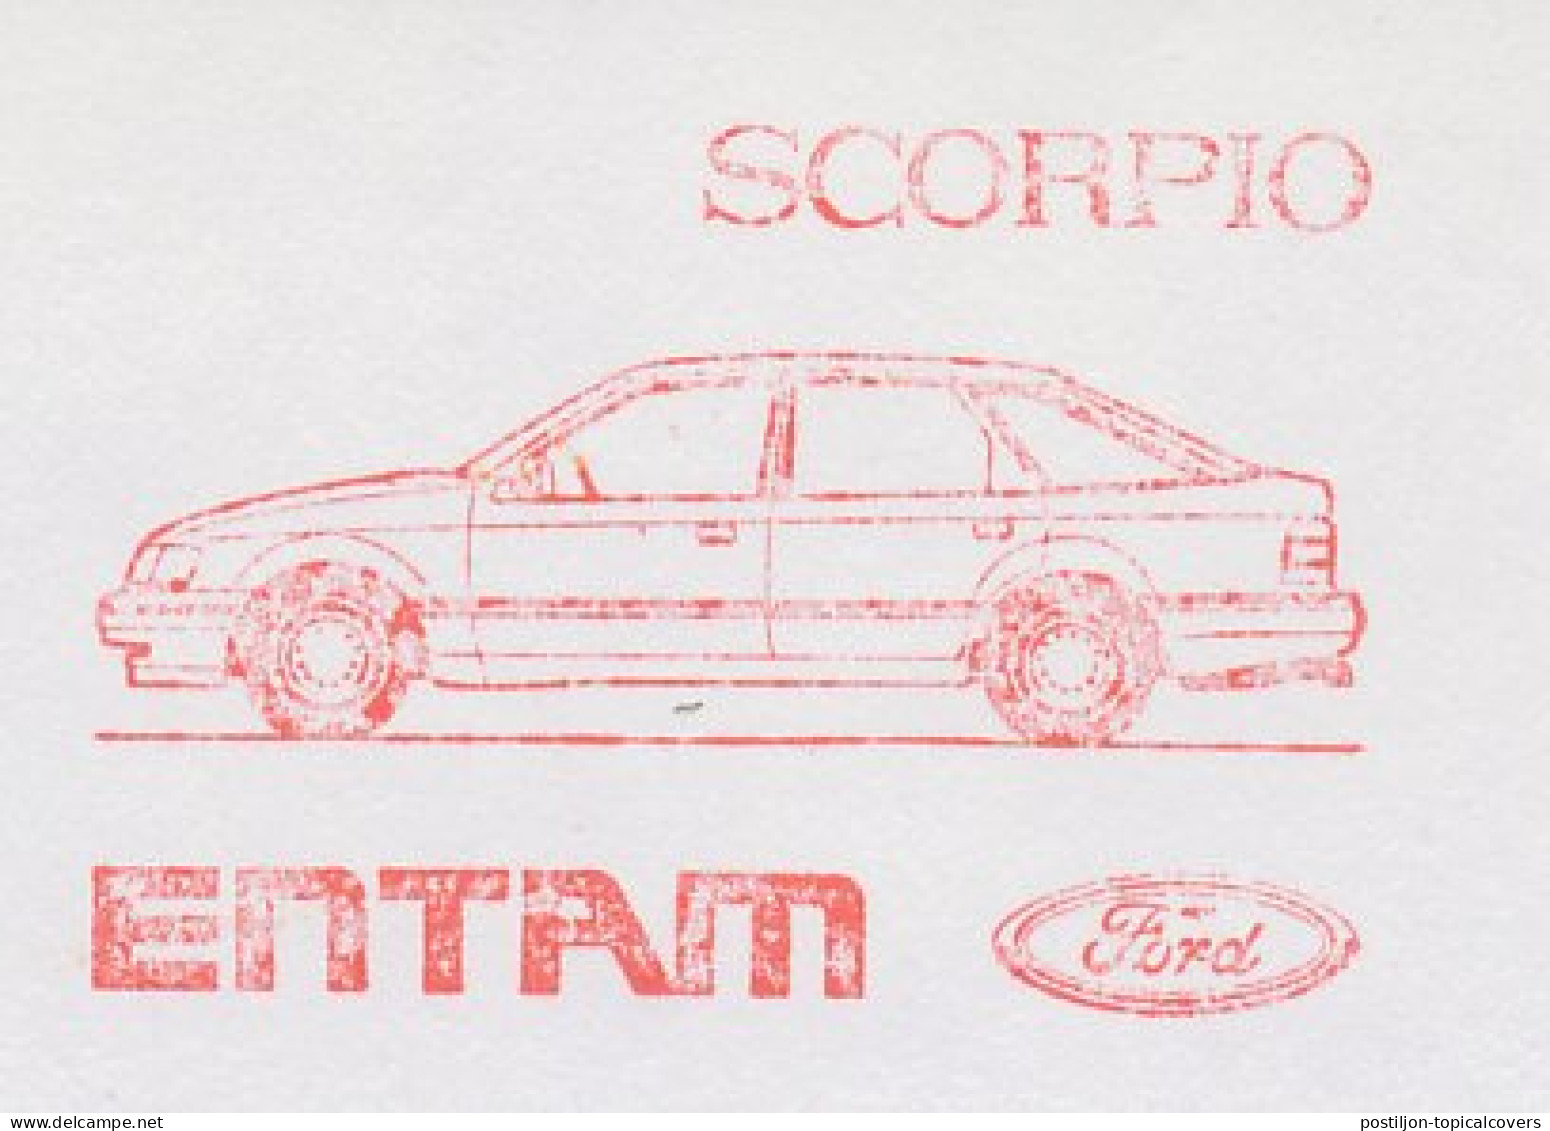 Meter Cut Netherlands 1986 Car - Ford Scorpio - Coches